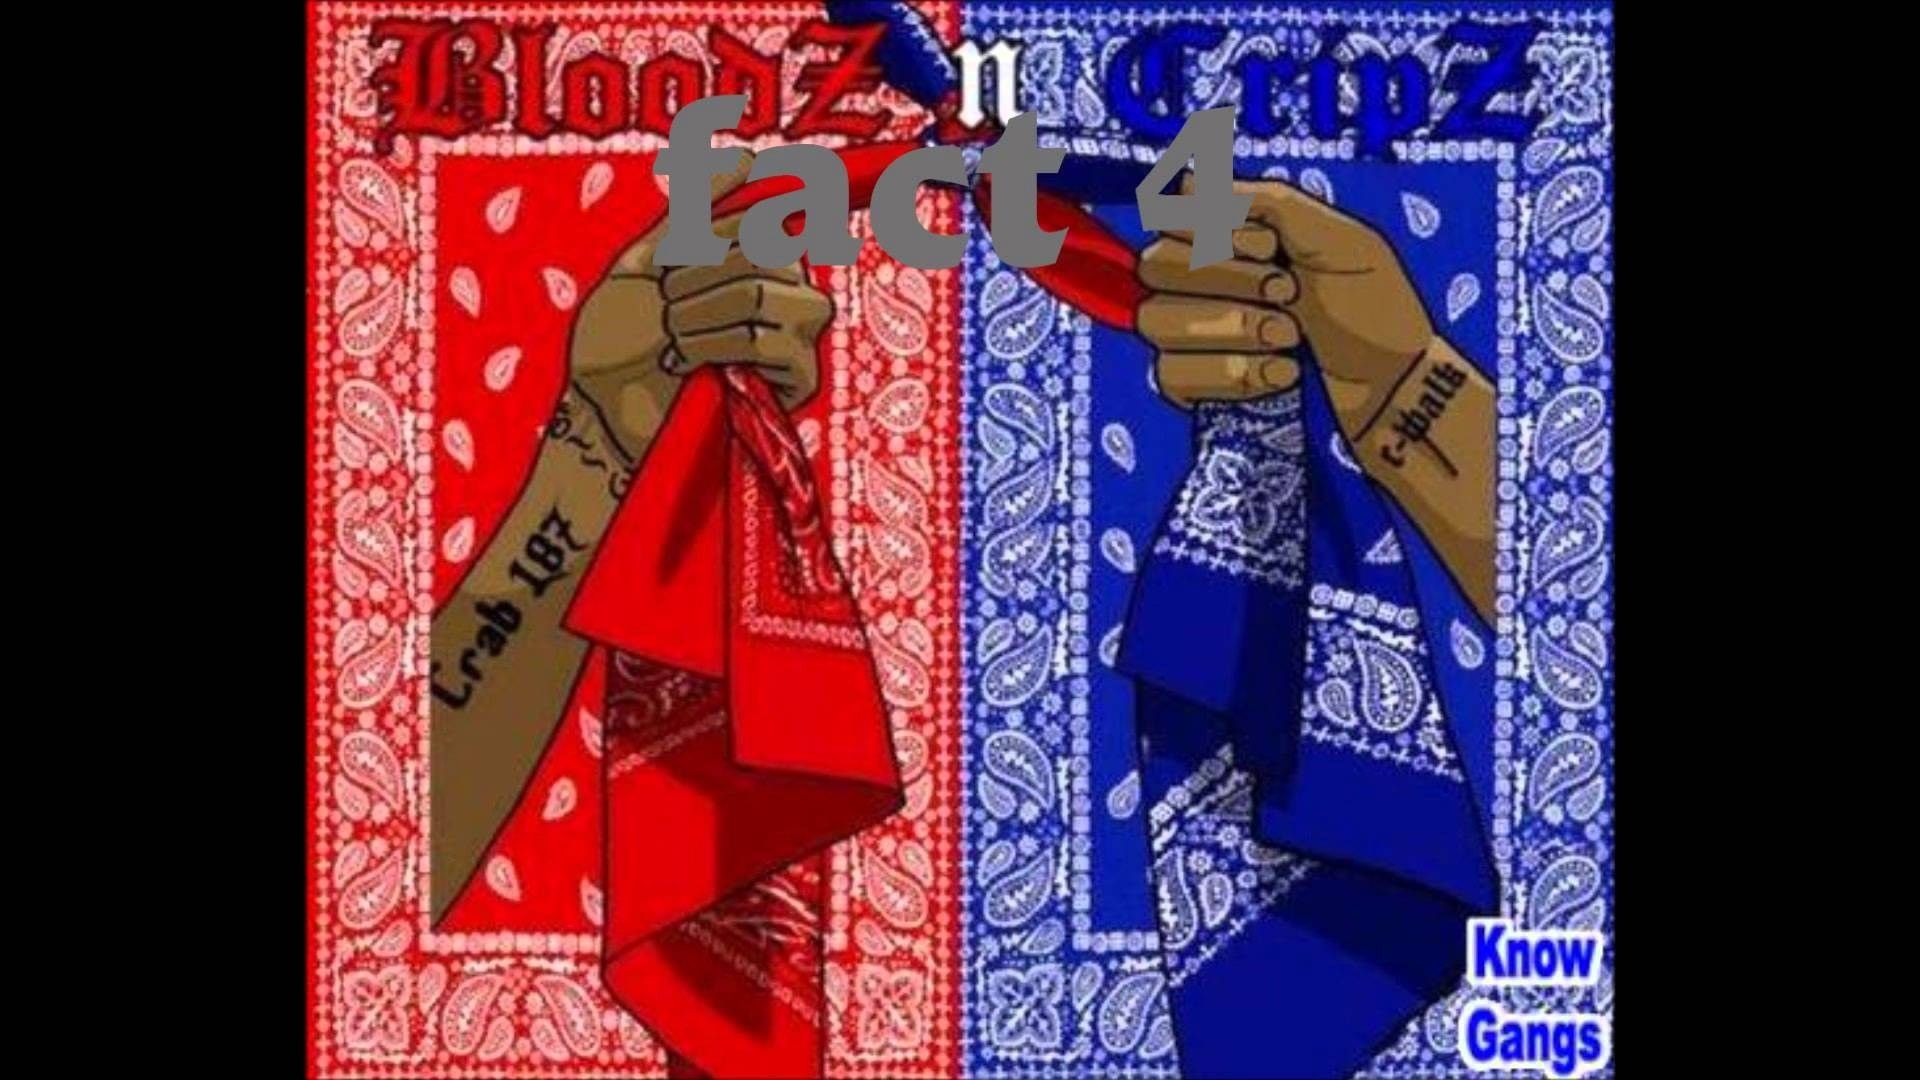 Bloods and Crips